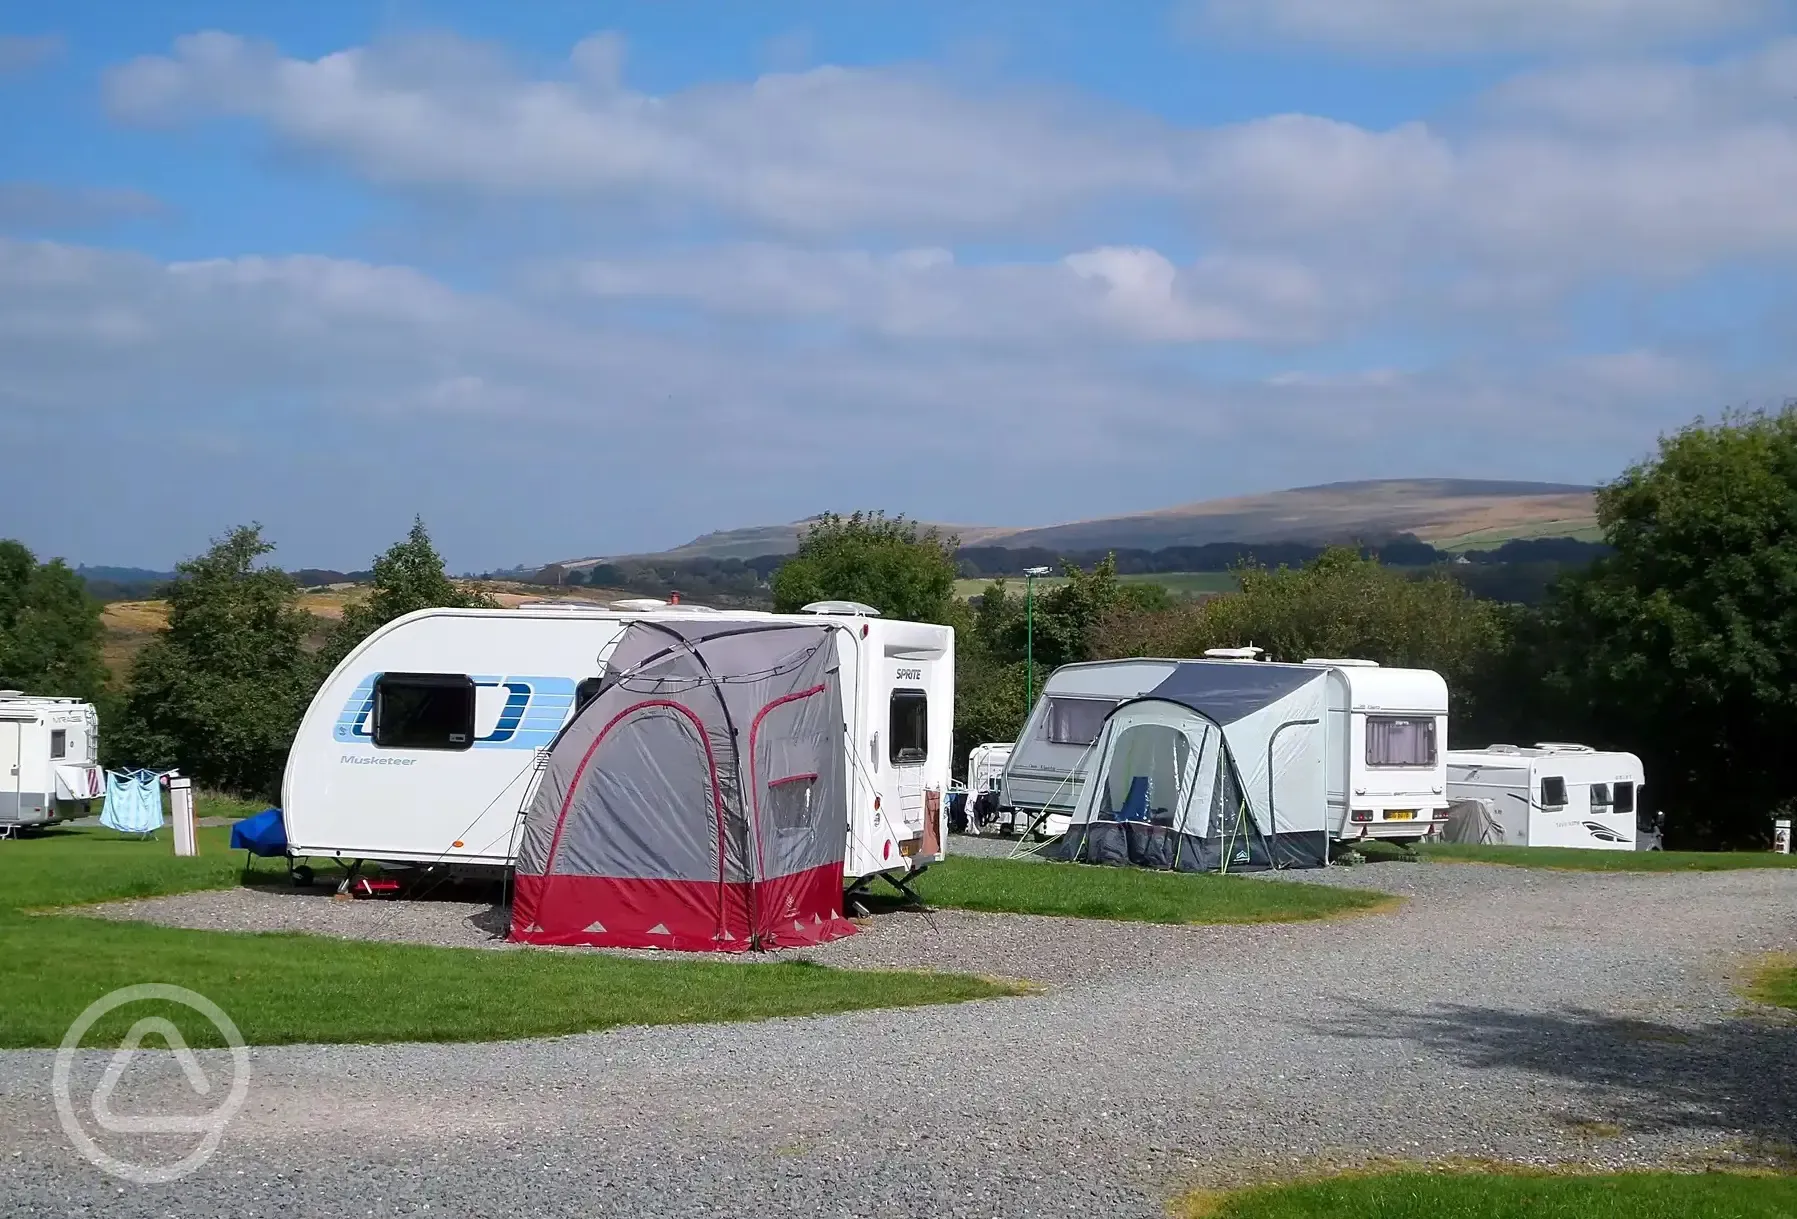 Pitches and trailer tents